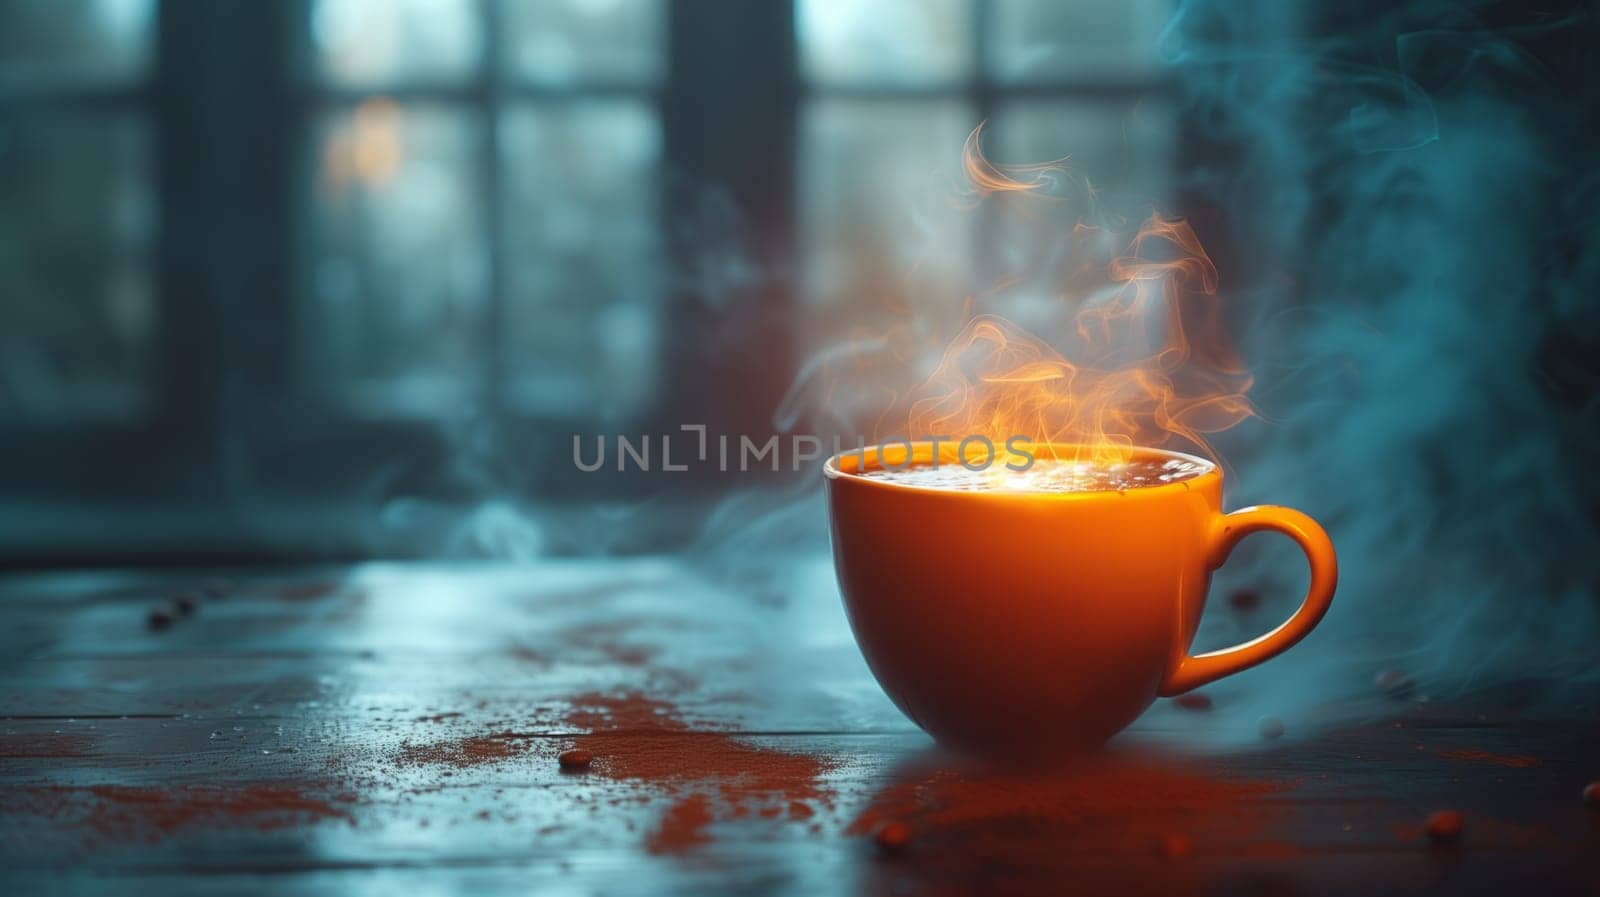 A cup of hot coffee is placed on a wooden table, with the steam rising from the liquid. The drinkware is surrounded by tableware and serveware